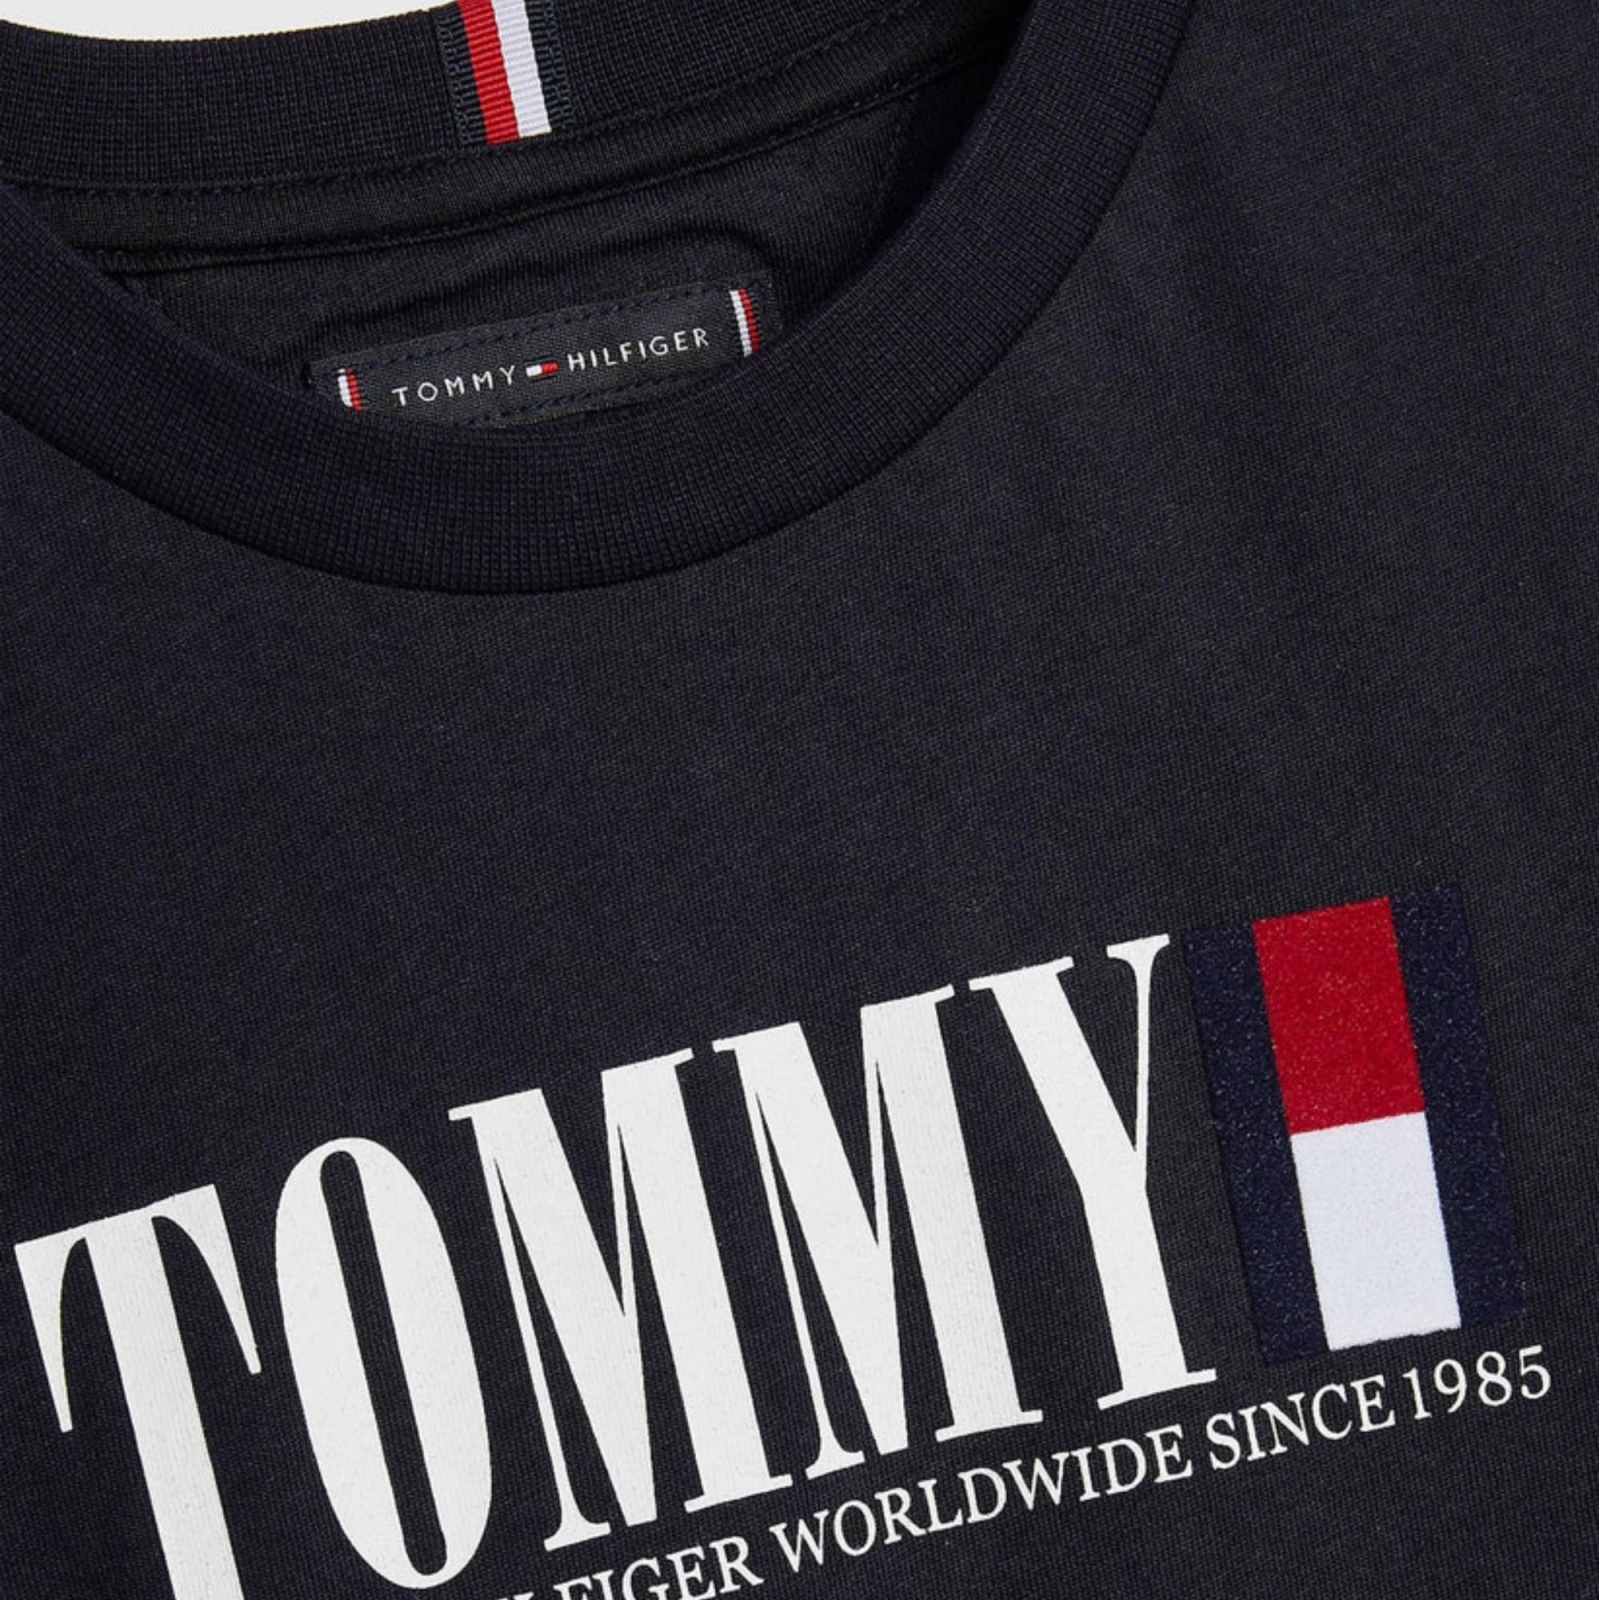 TOMMY HILFIGER GRAPHIC BOYS TEE LONG SLEEVE